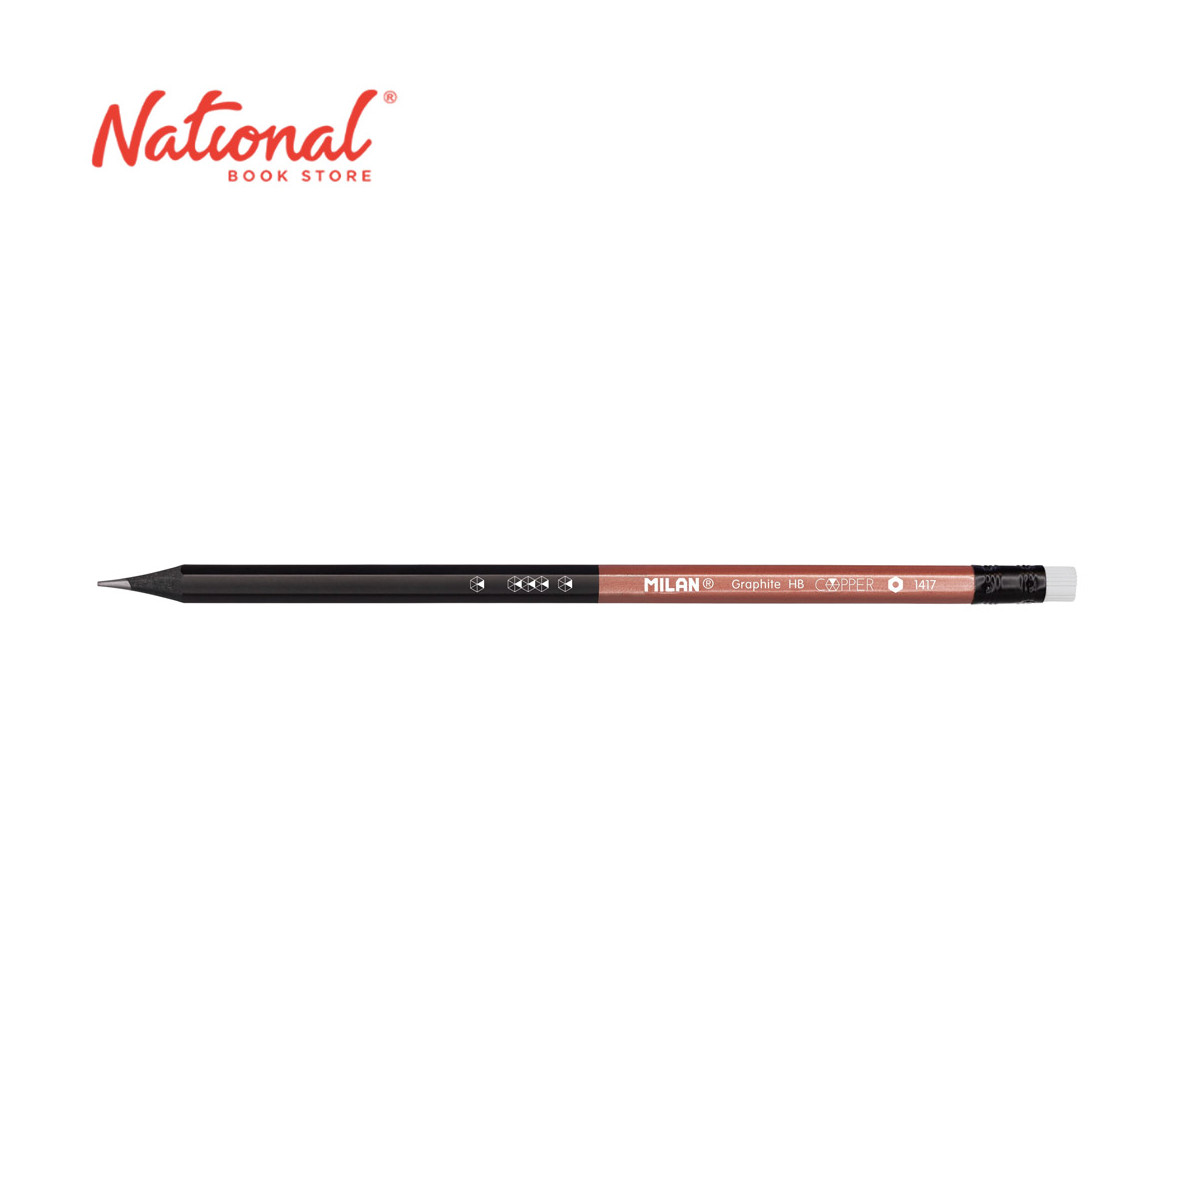 Milan Copper Graphite Pencil With Eraser HB 71421724 (Assorted Barrel Color, color may vary)